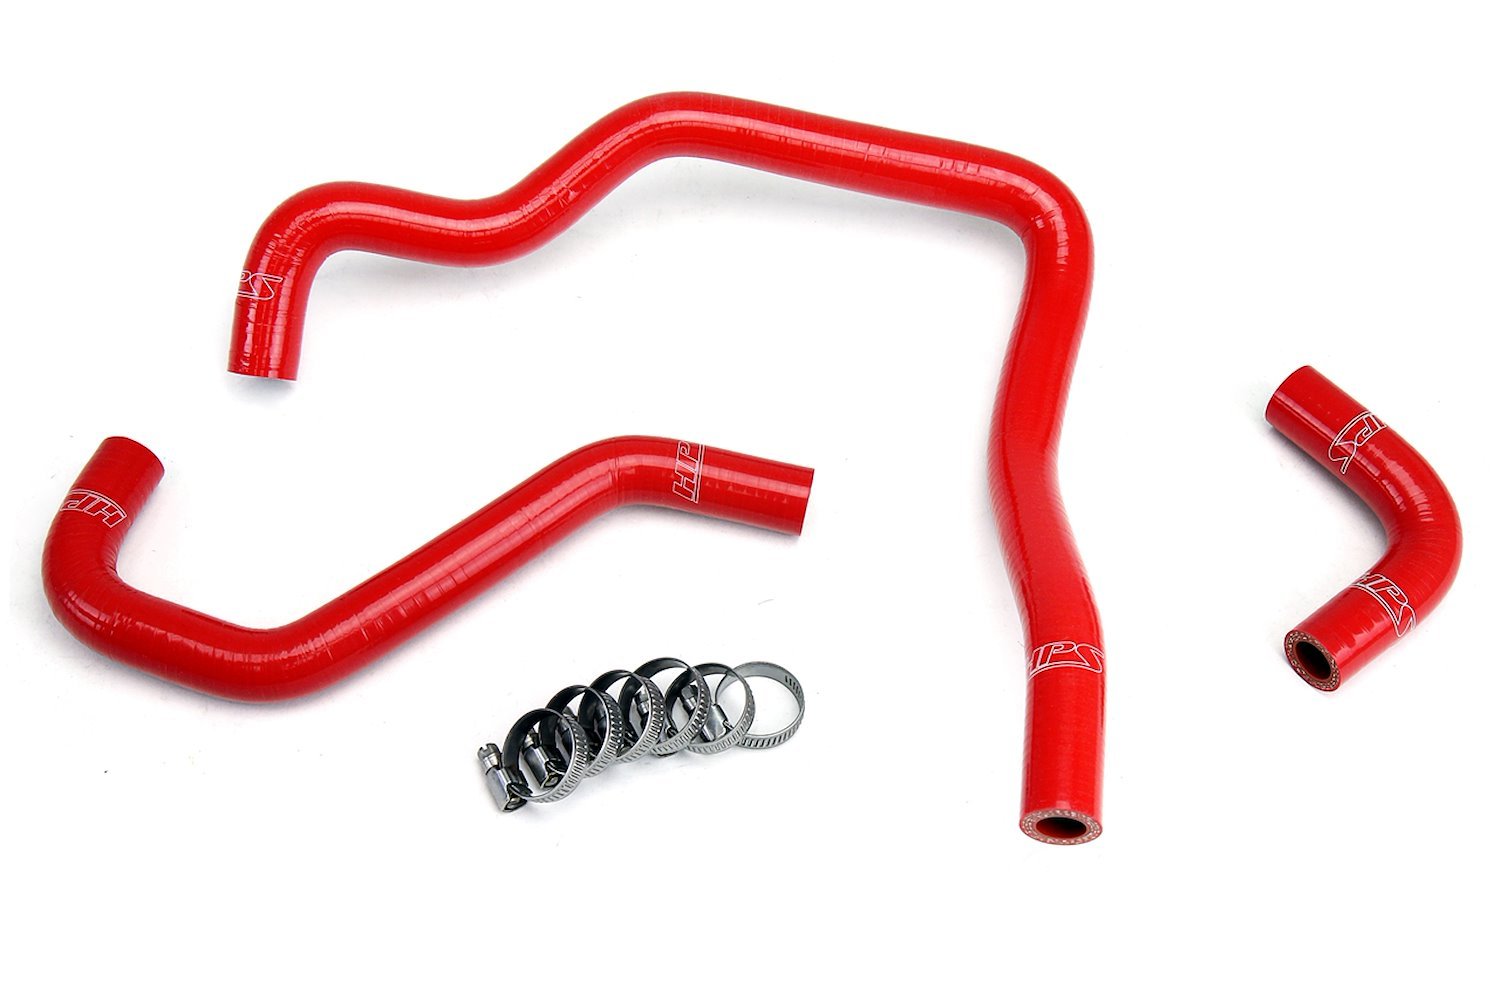 57-1430-RED Heater Hose Kit, High-Temp 3-Ply Reinforced Silicone, Replace OEM Rubber Heater Coolant Hoses